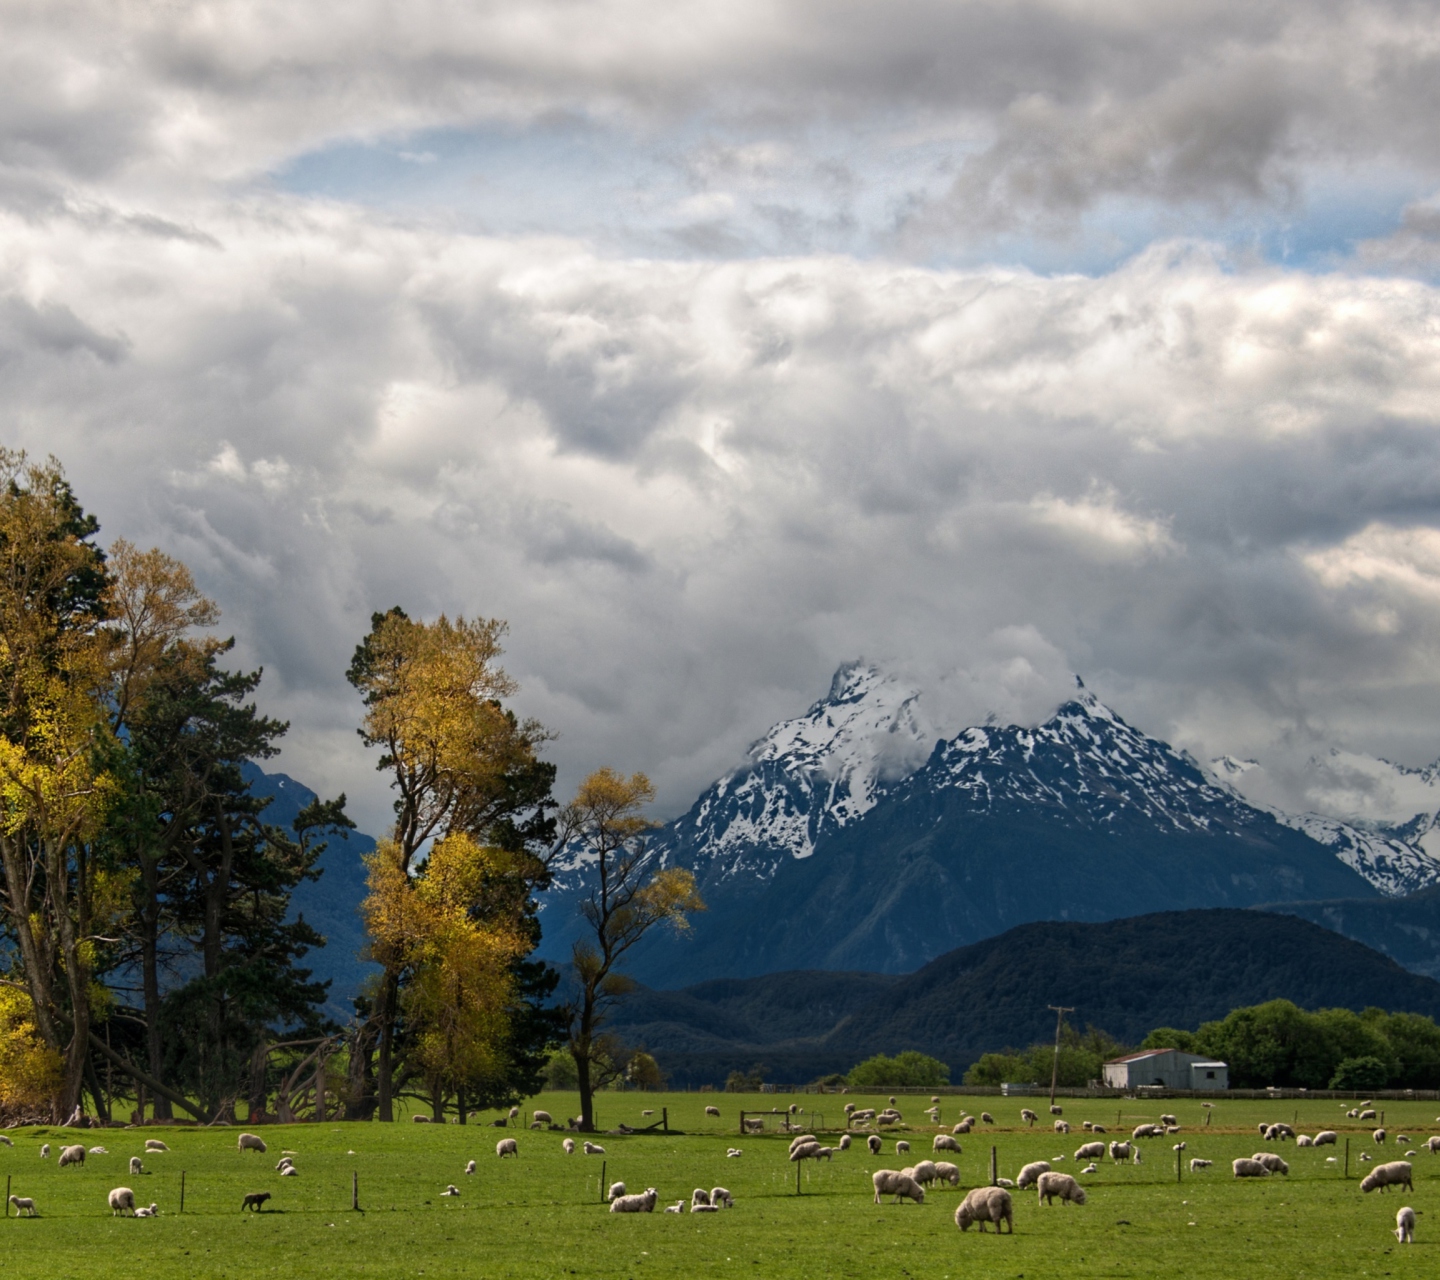 Das Sheeps On Green Field And Mountain View Wallpaper 1440x1280